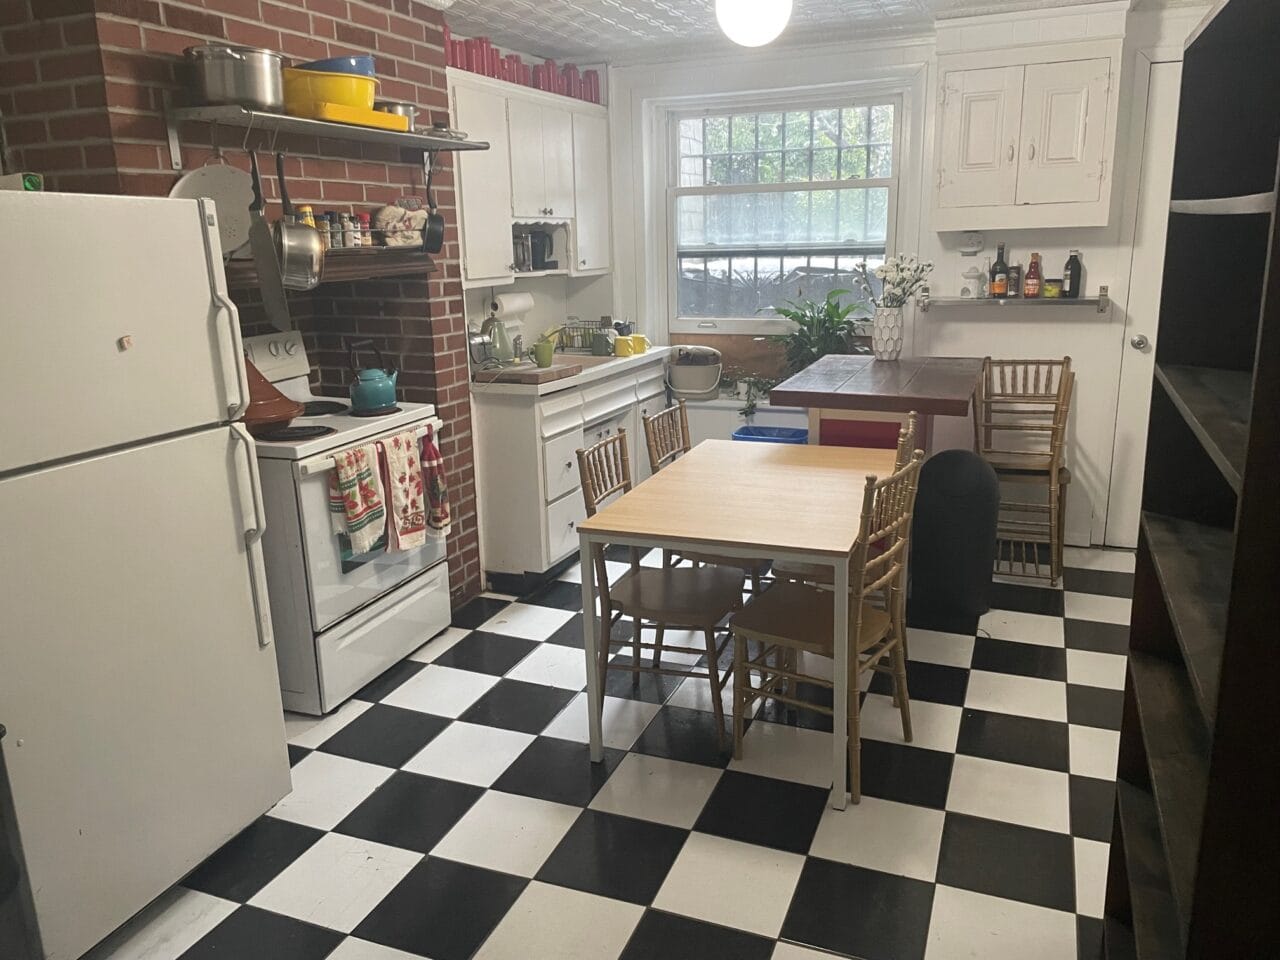 , Short-term furnished studio apartment in Park Slope, NY available